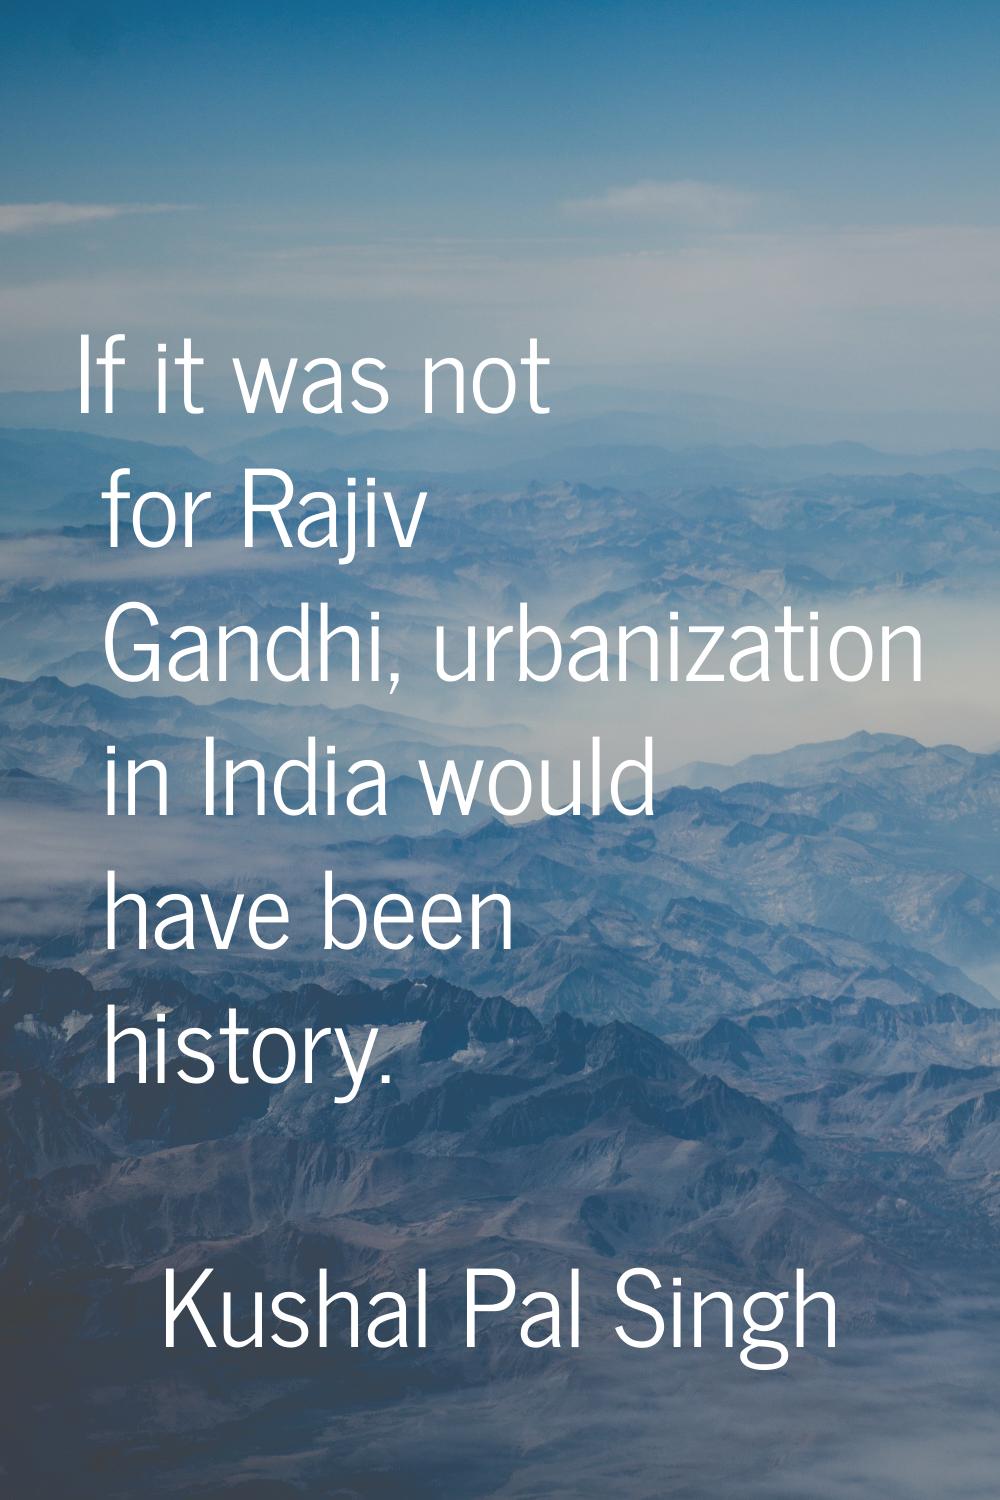 If it was not for Rajiv Gandhi, urbanization in India would have been history.